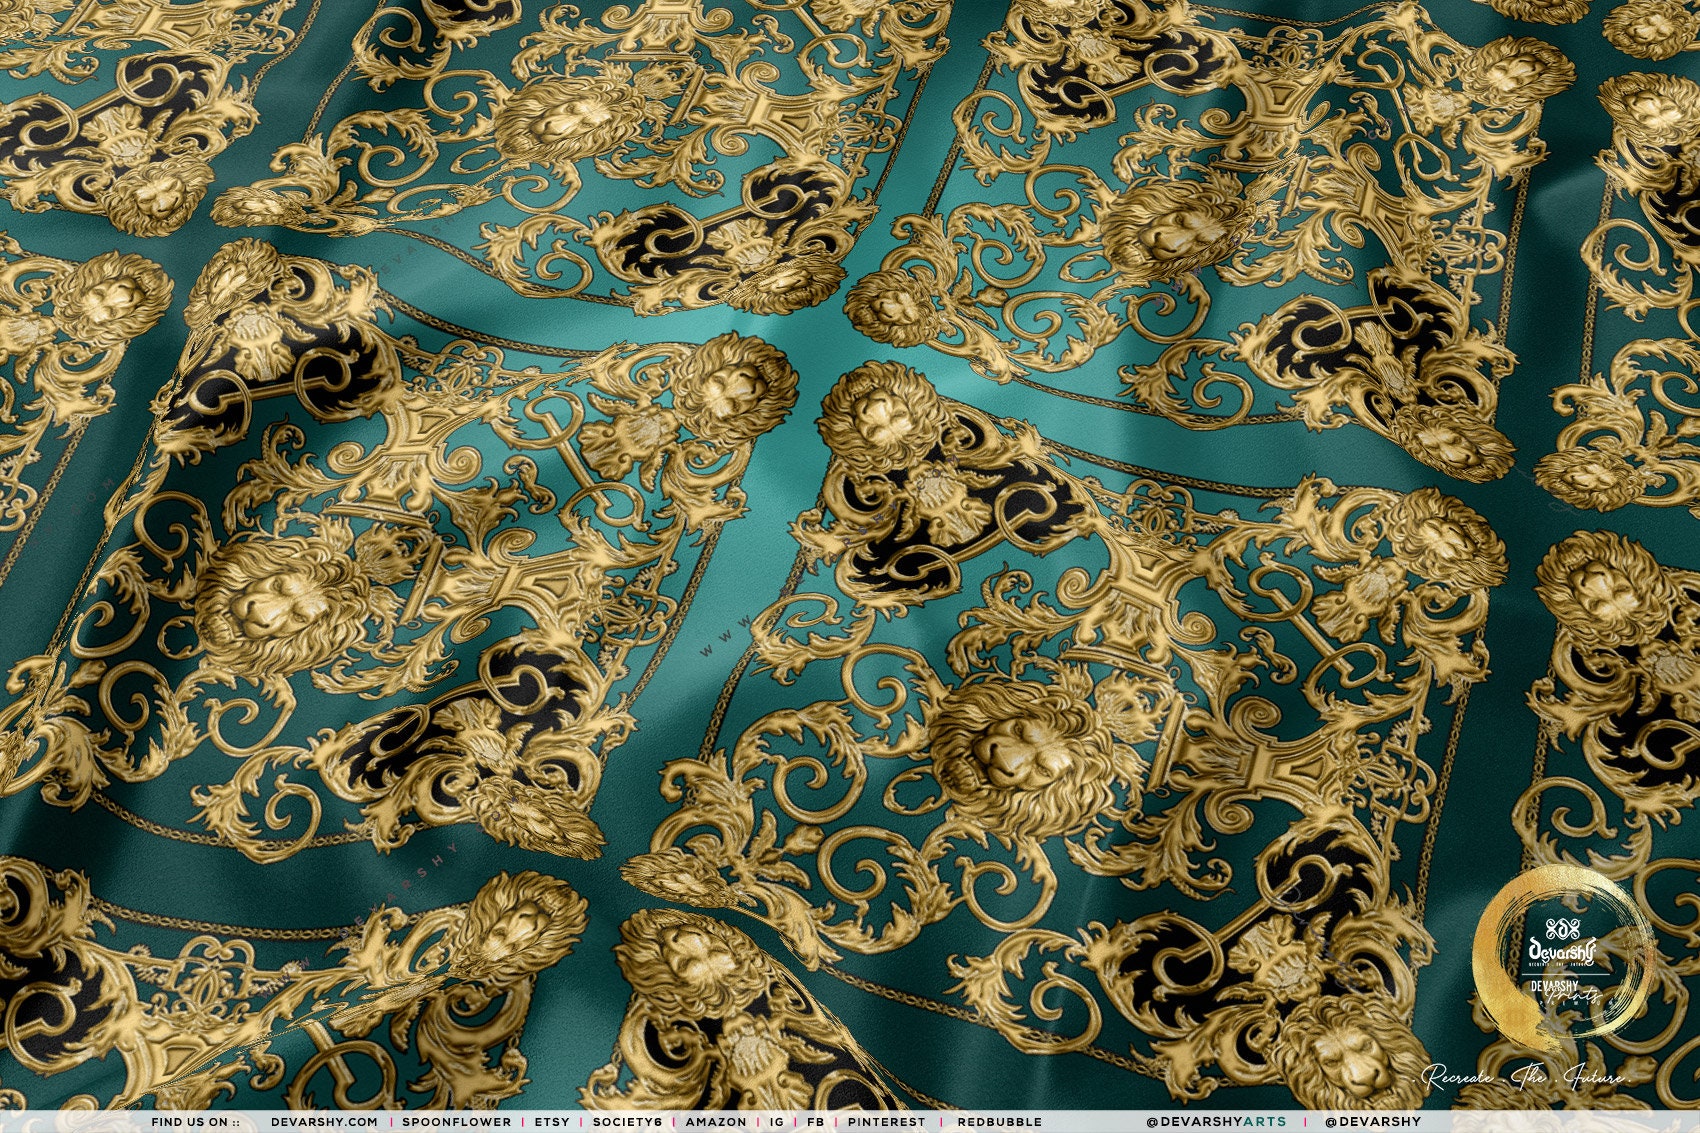 Golden Squares Upholstery Fabric 3meters, 6 Designs, 13 Fabric